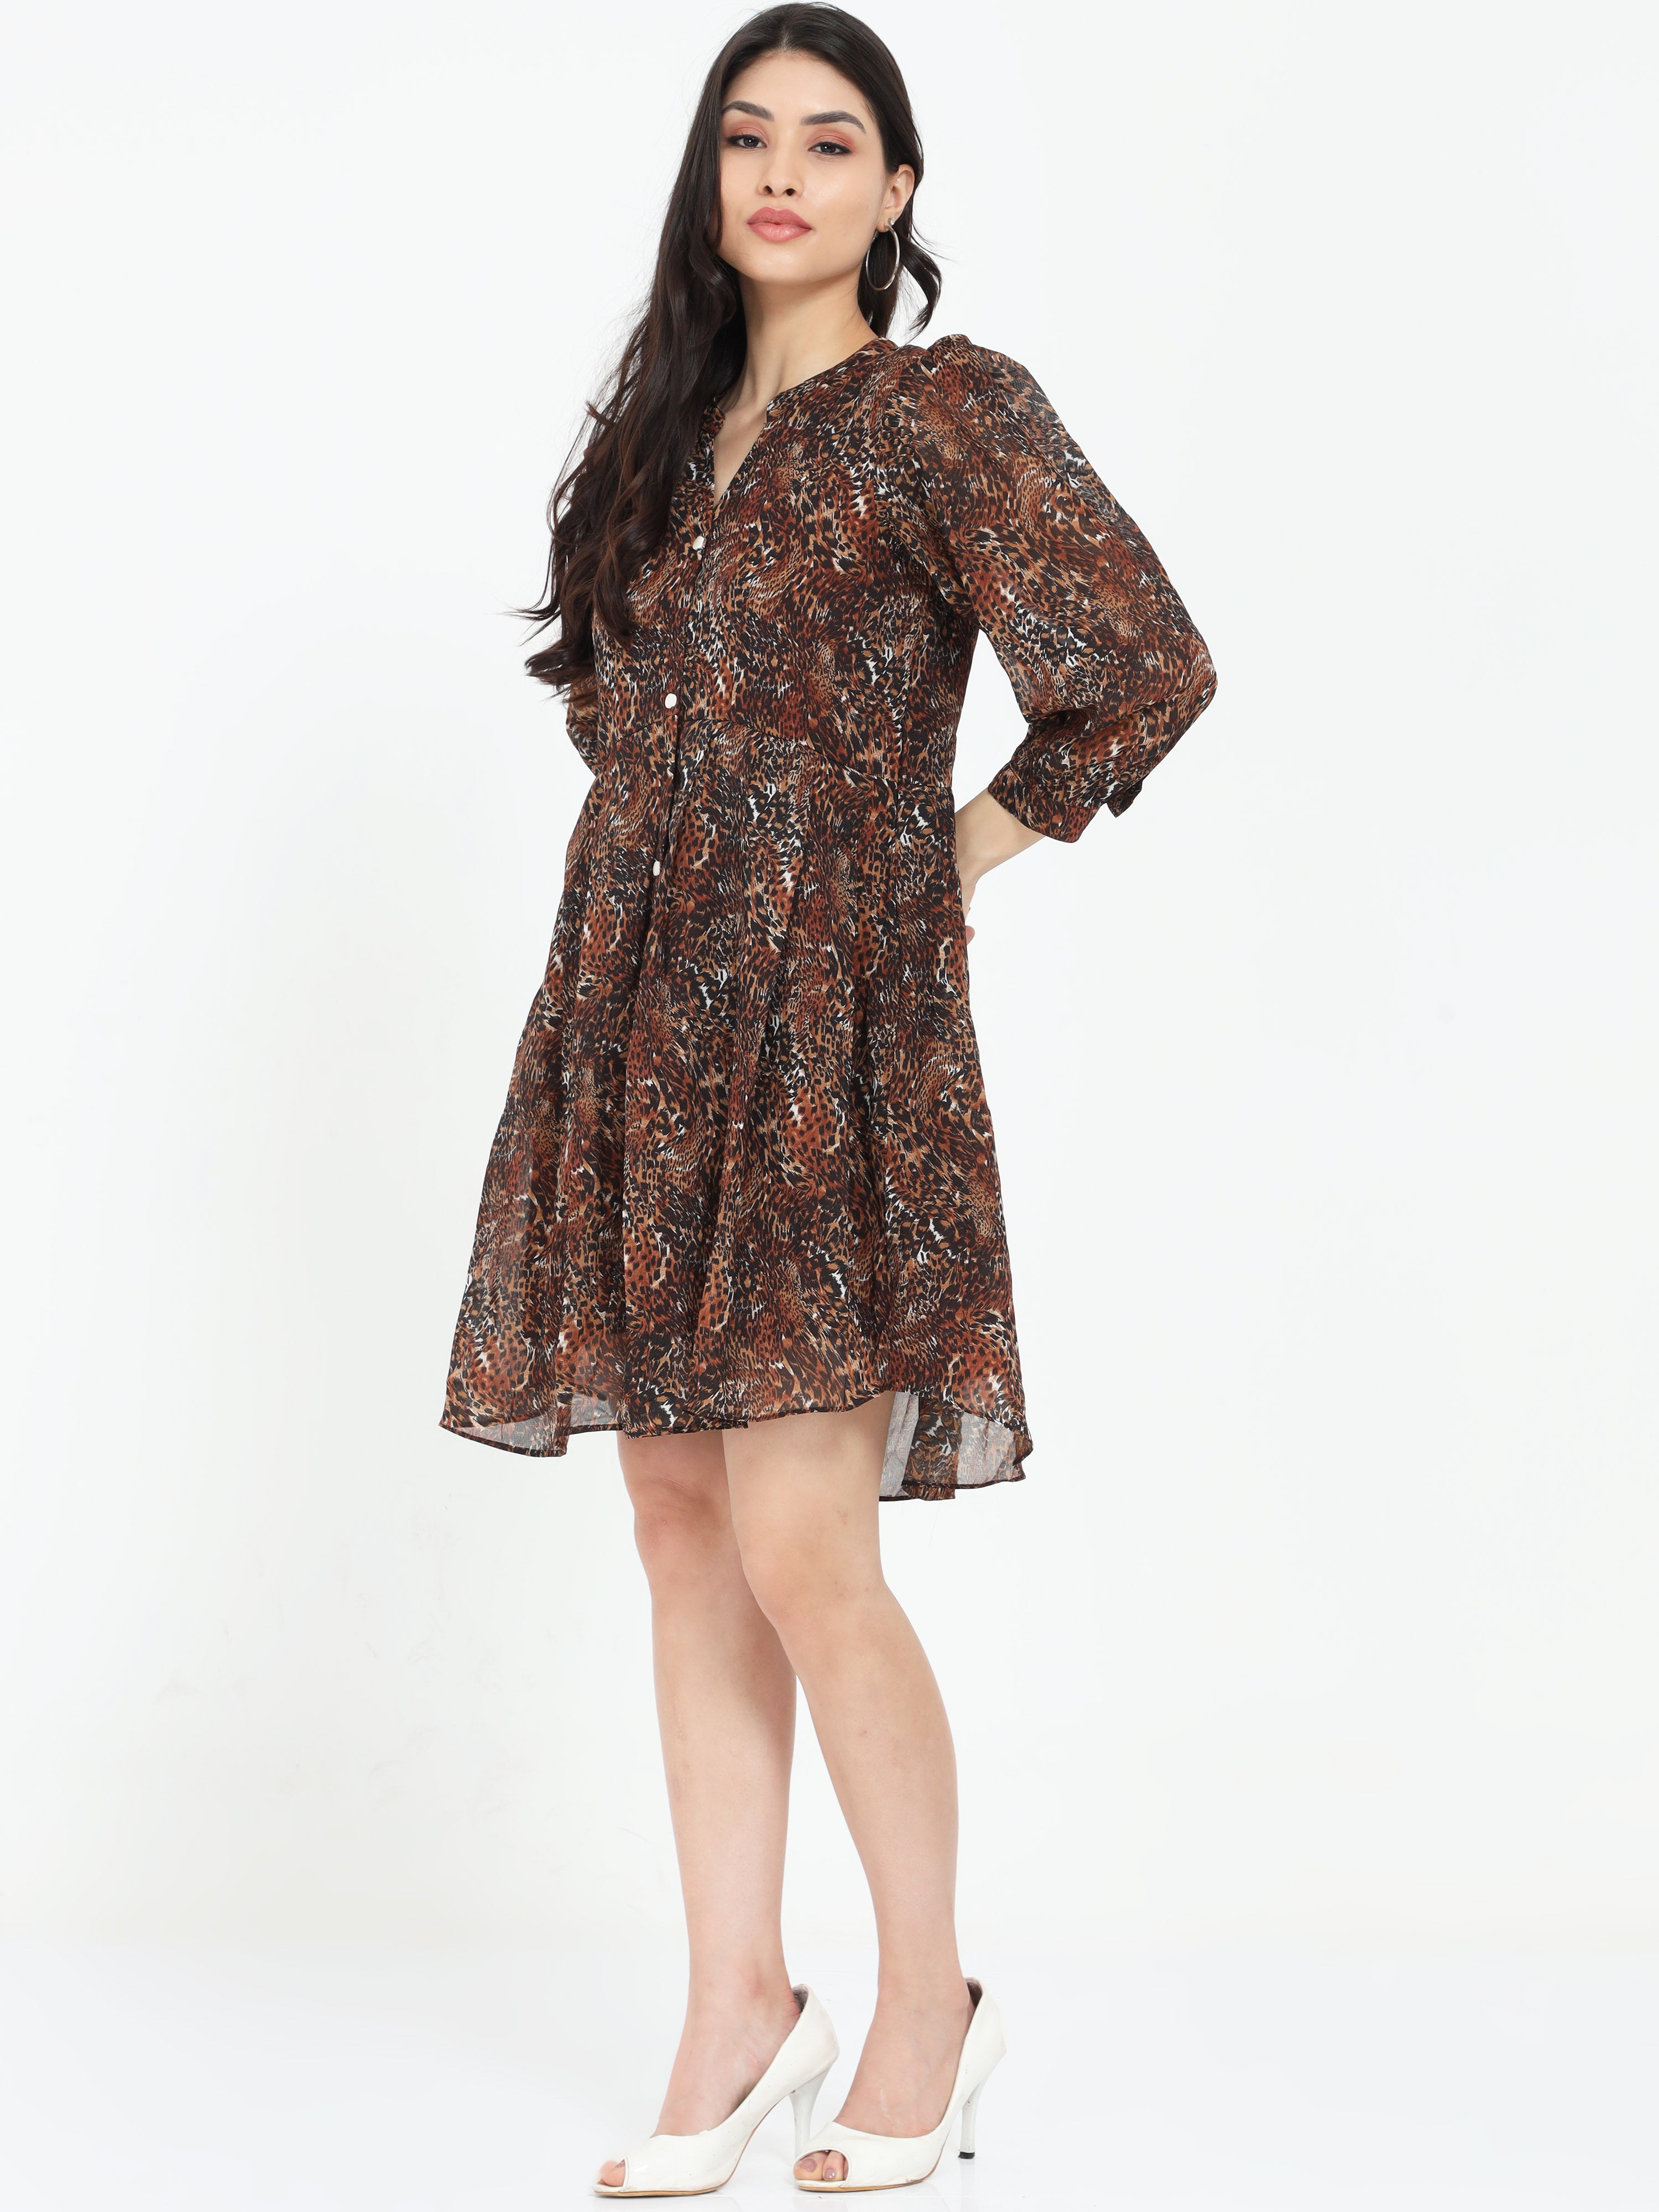 The Trendy Treasure - Animal Print Style Chinese Collar and Button Cuff Sleeve Dress